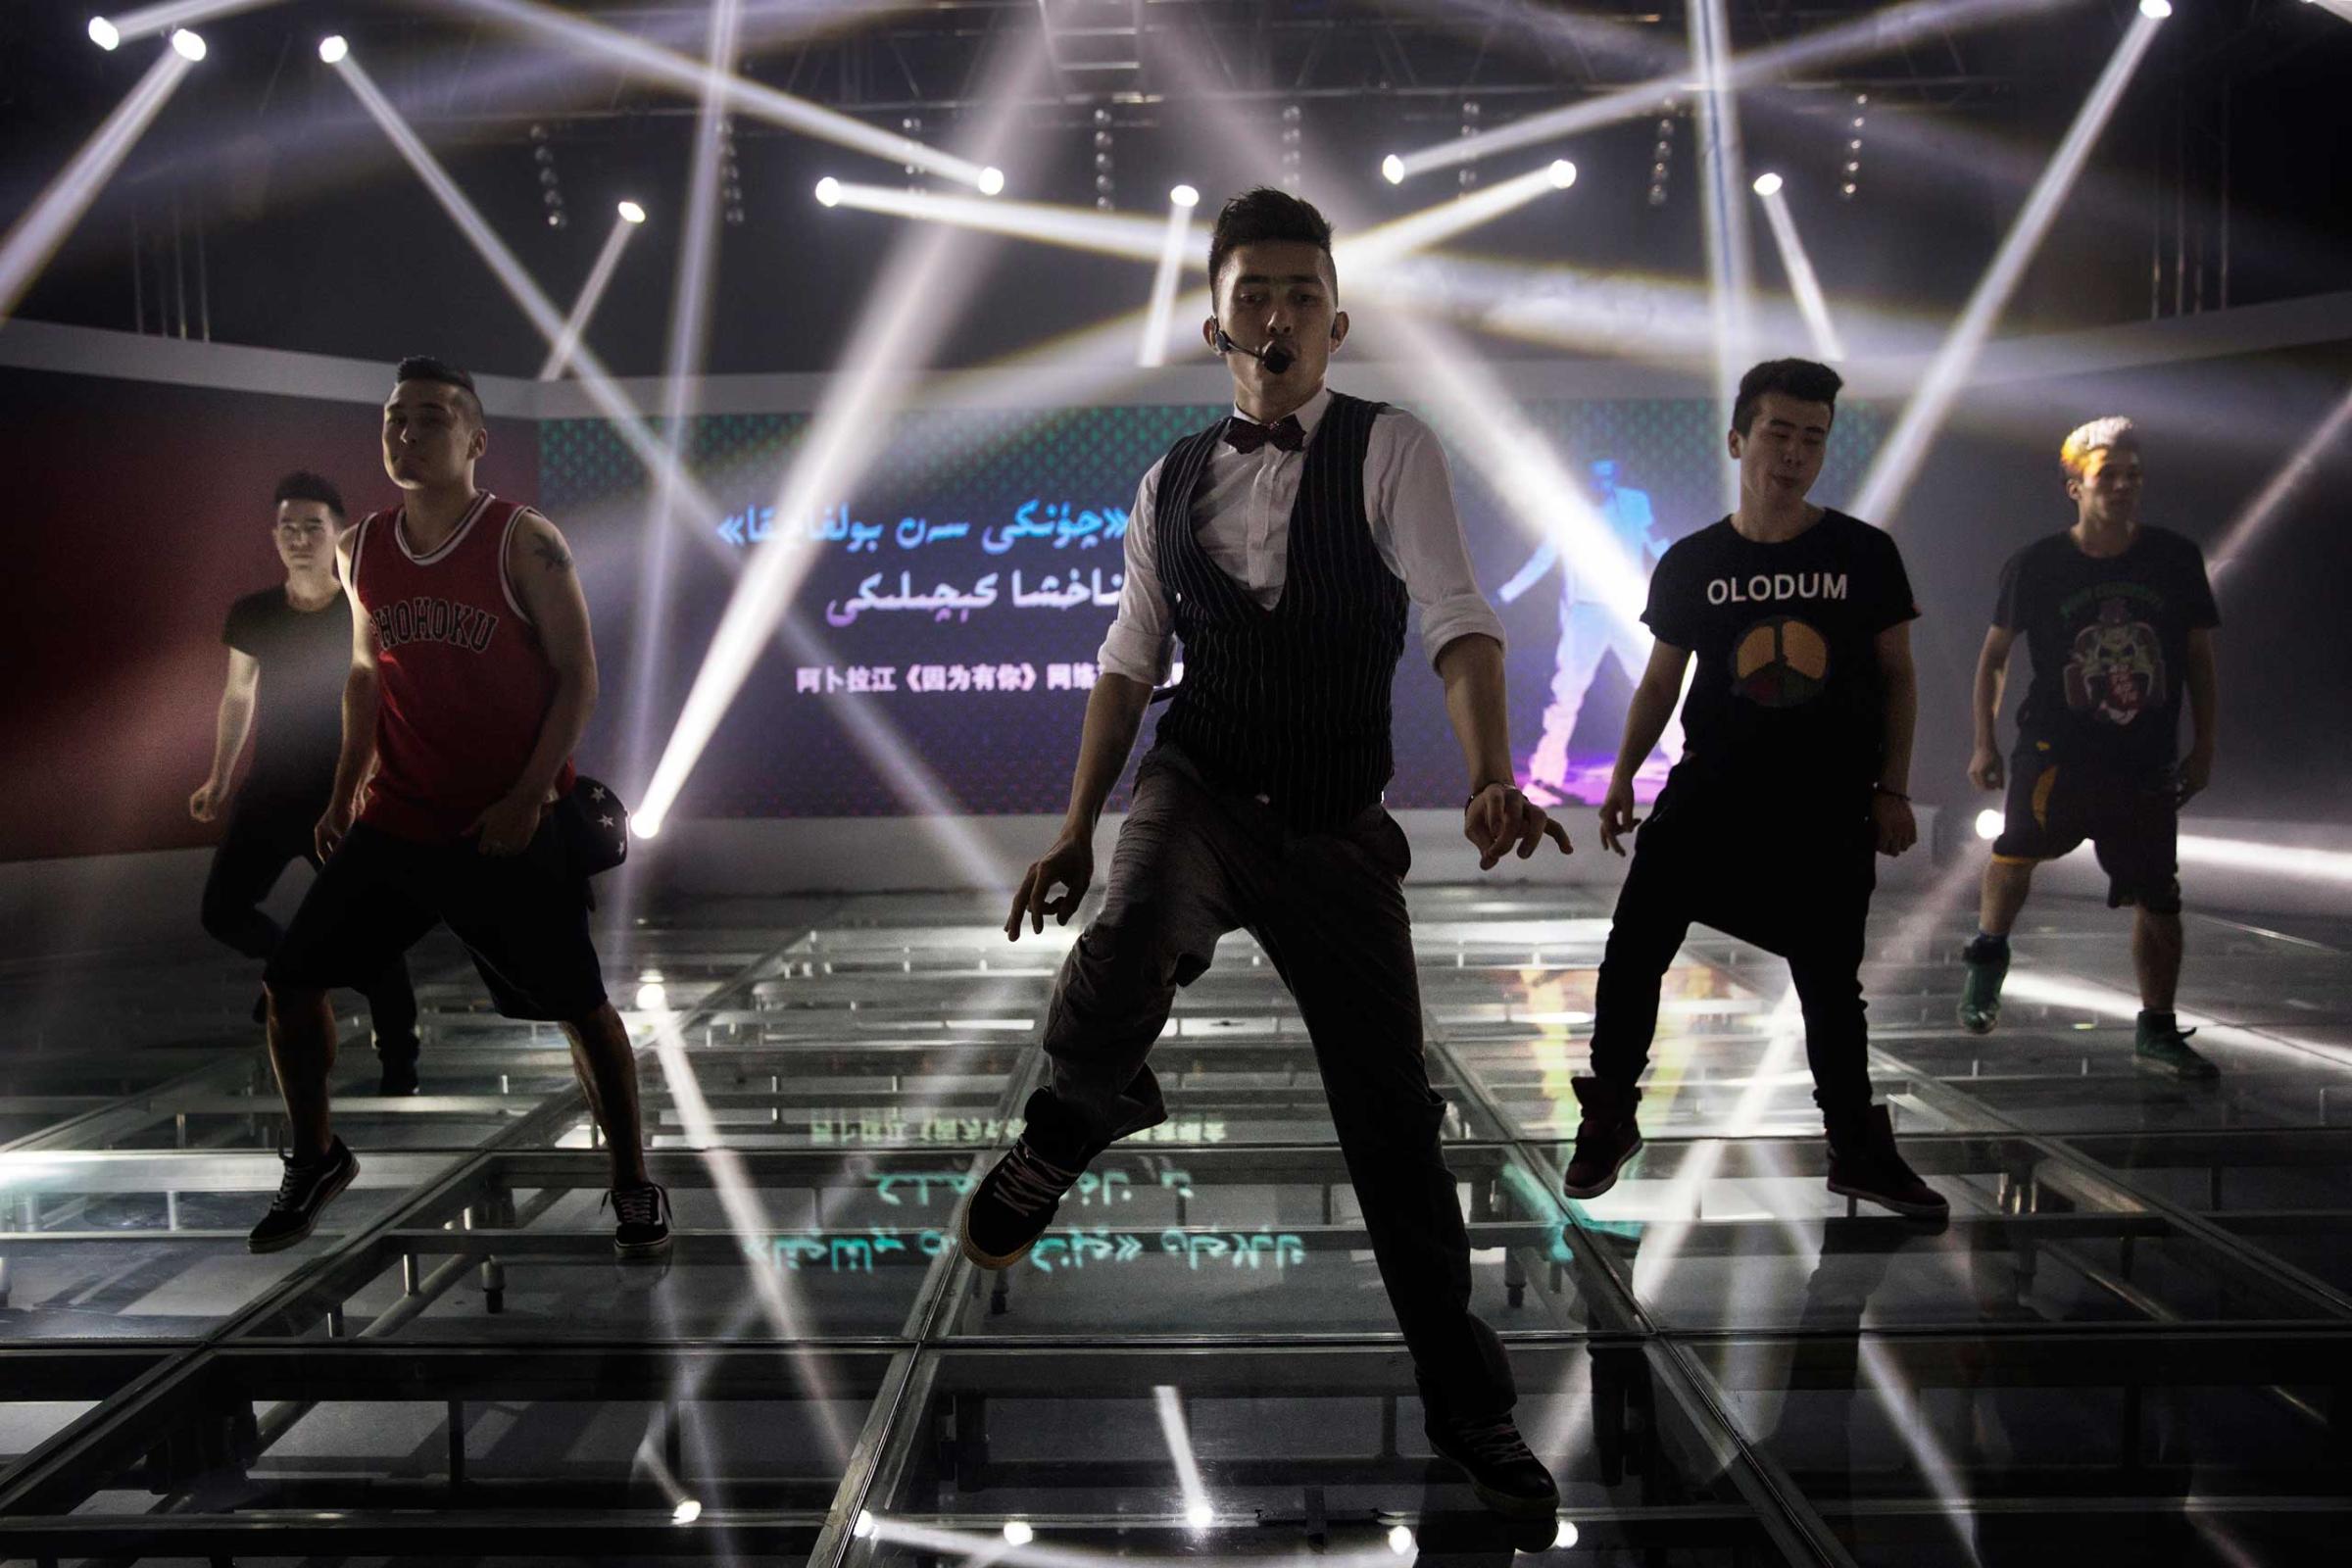 Ablajan performs on stage with his dancers at rehearsals for a planned live webcast concert scheduled for that afternoon in Urumqi, China on July 31, 2014.